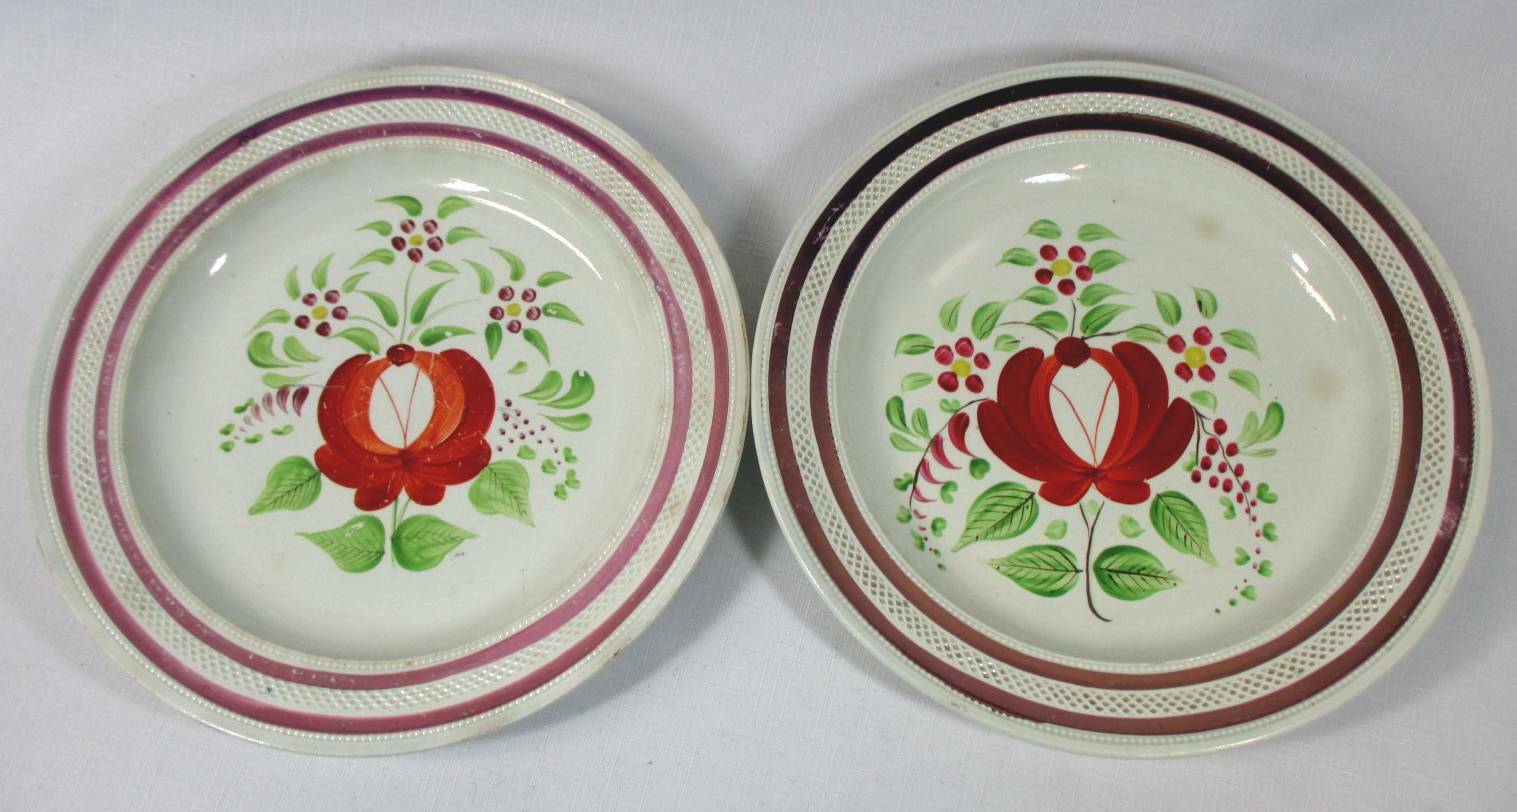 PAIR STAFFORDSHIRE SOFT PASTE PINK LUSTER HAND-PAINTED DINNER PLATES